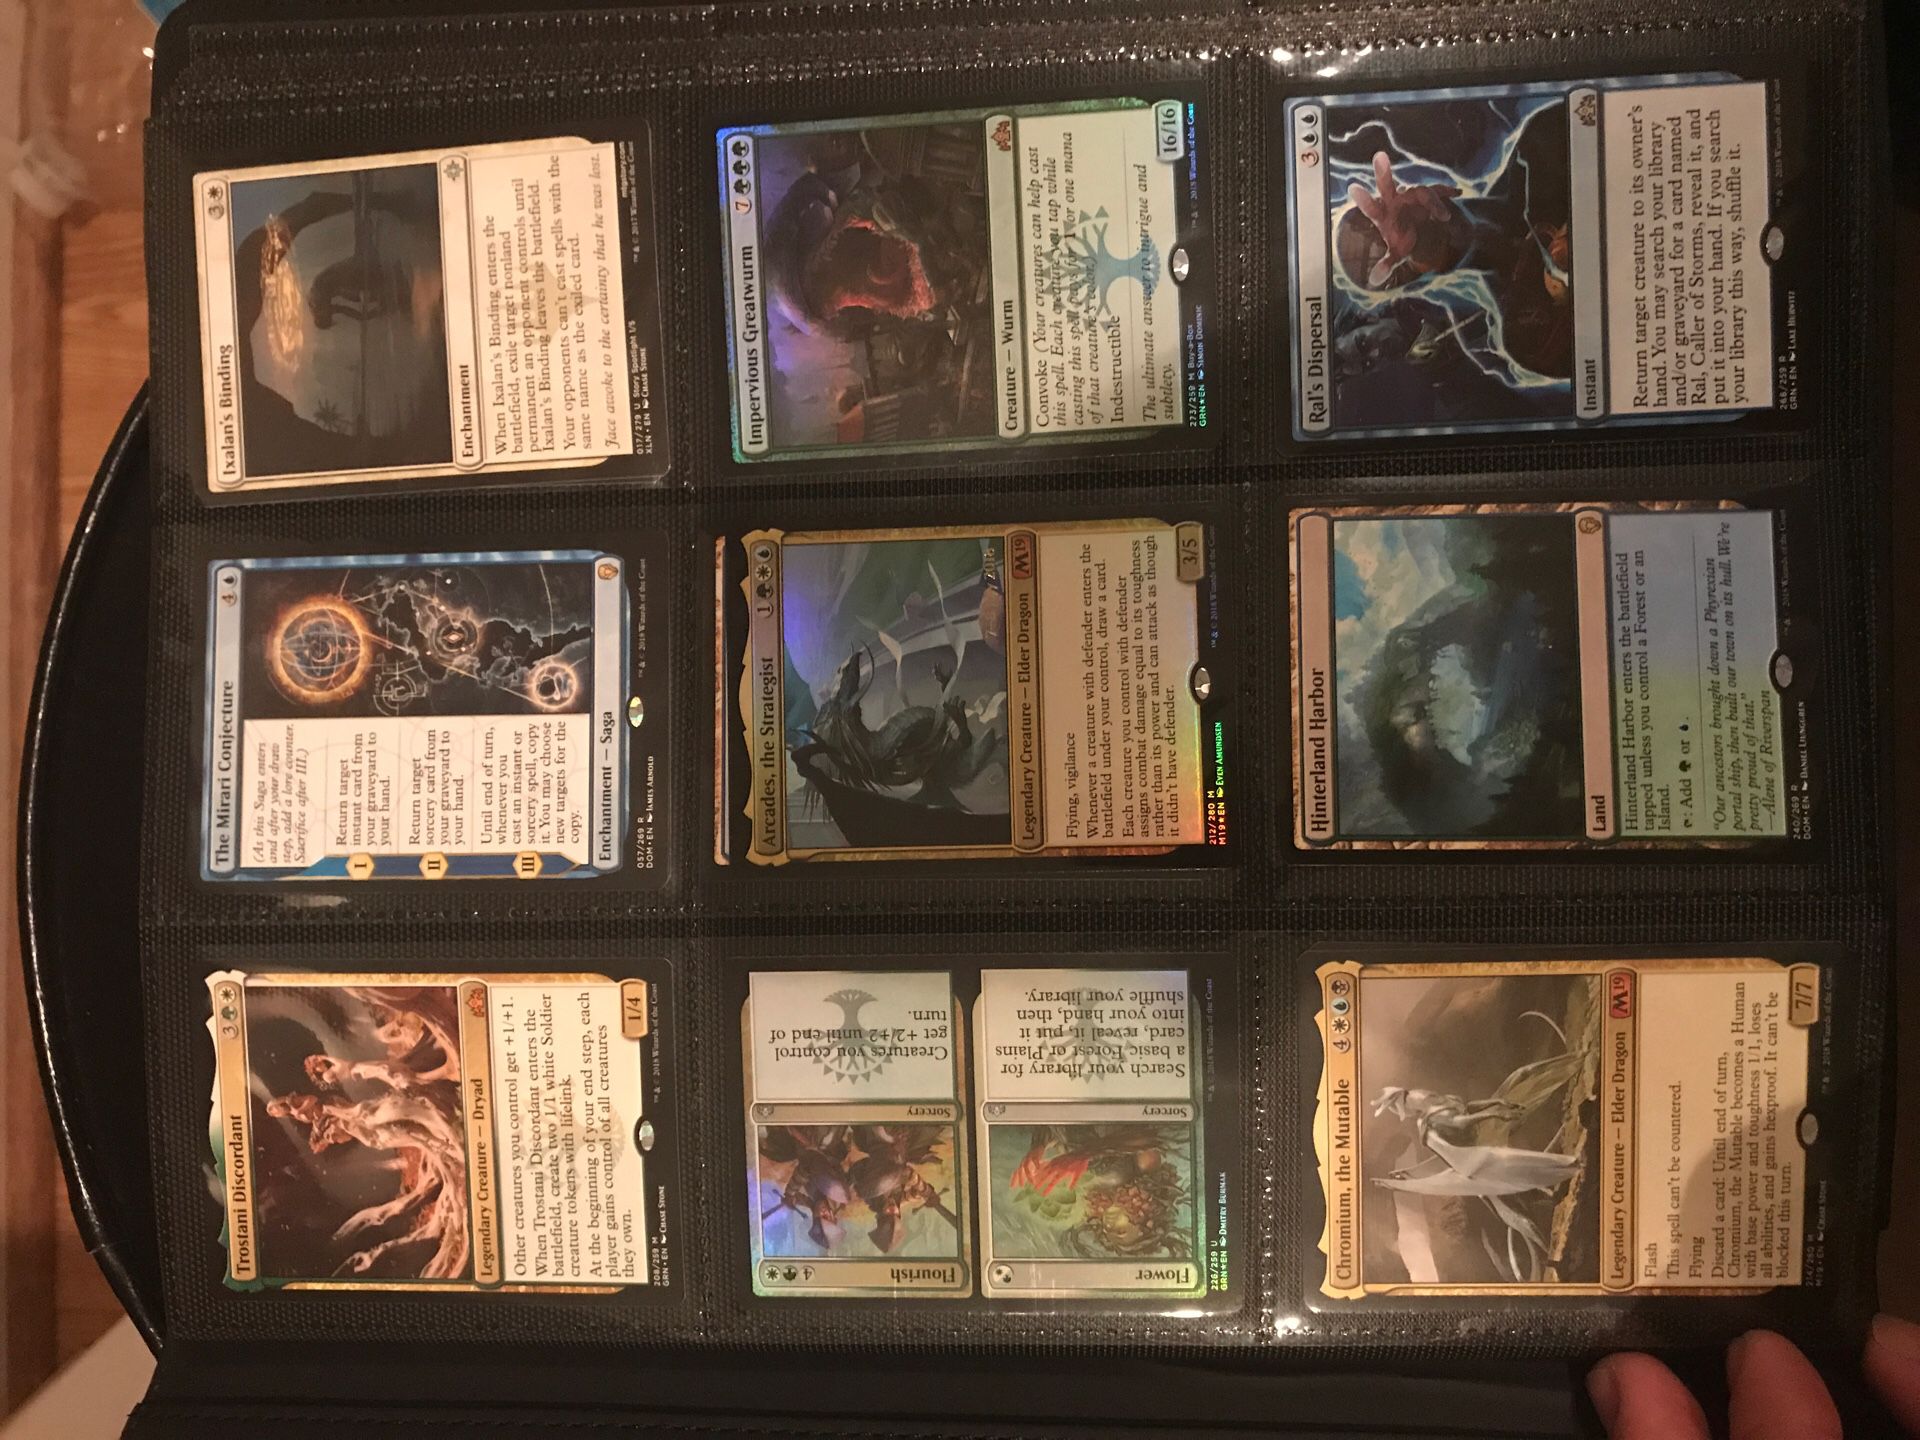 Mtg standard cards for sale lmk what you need I might have it